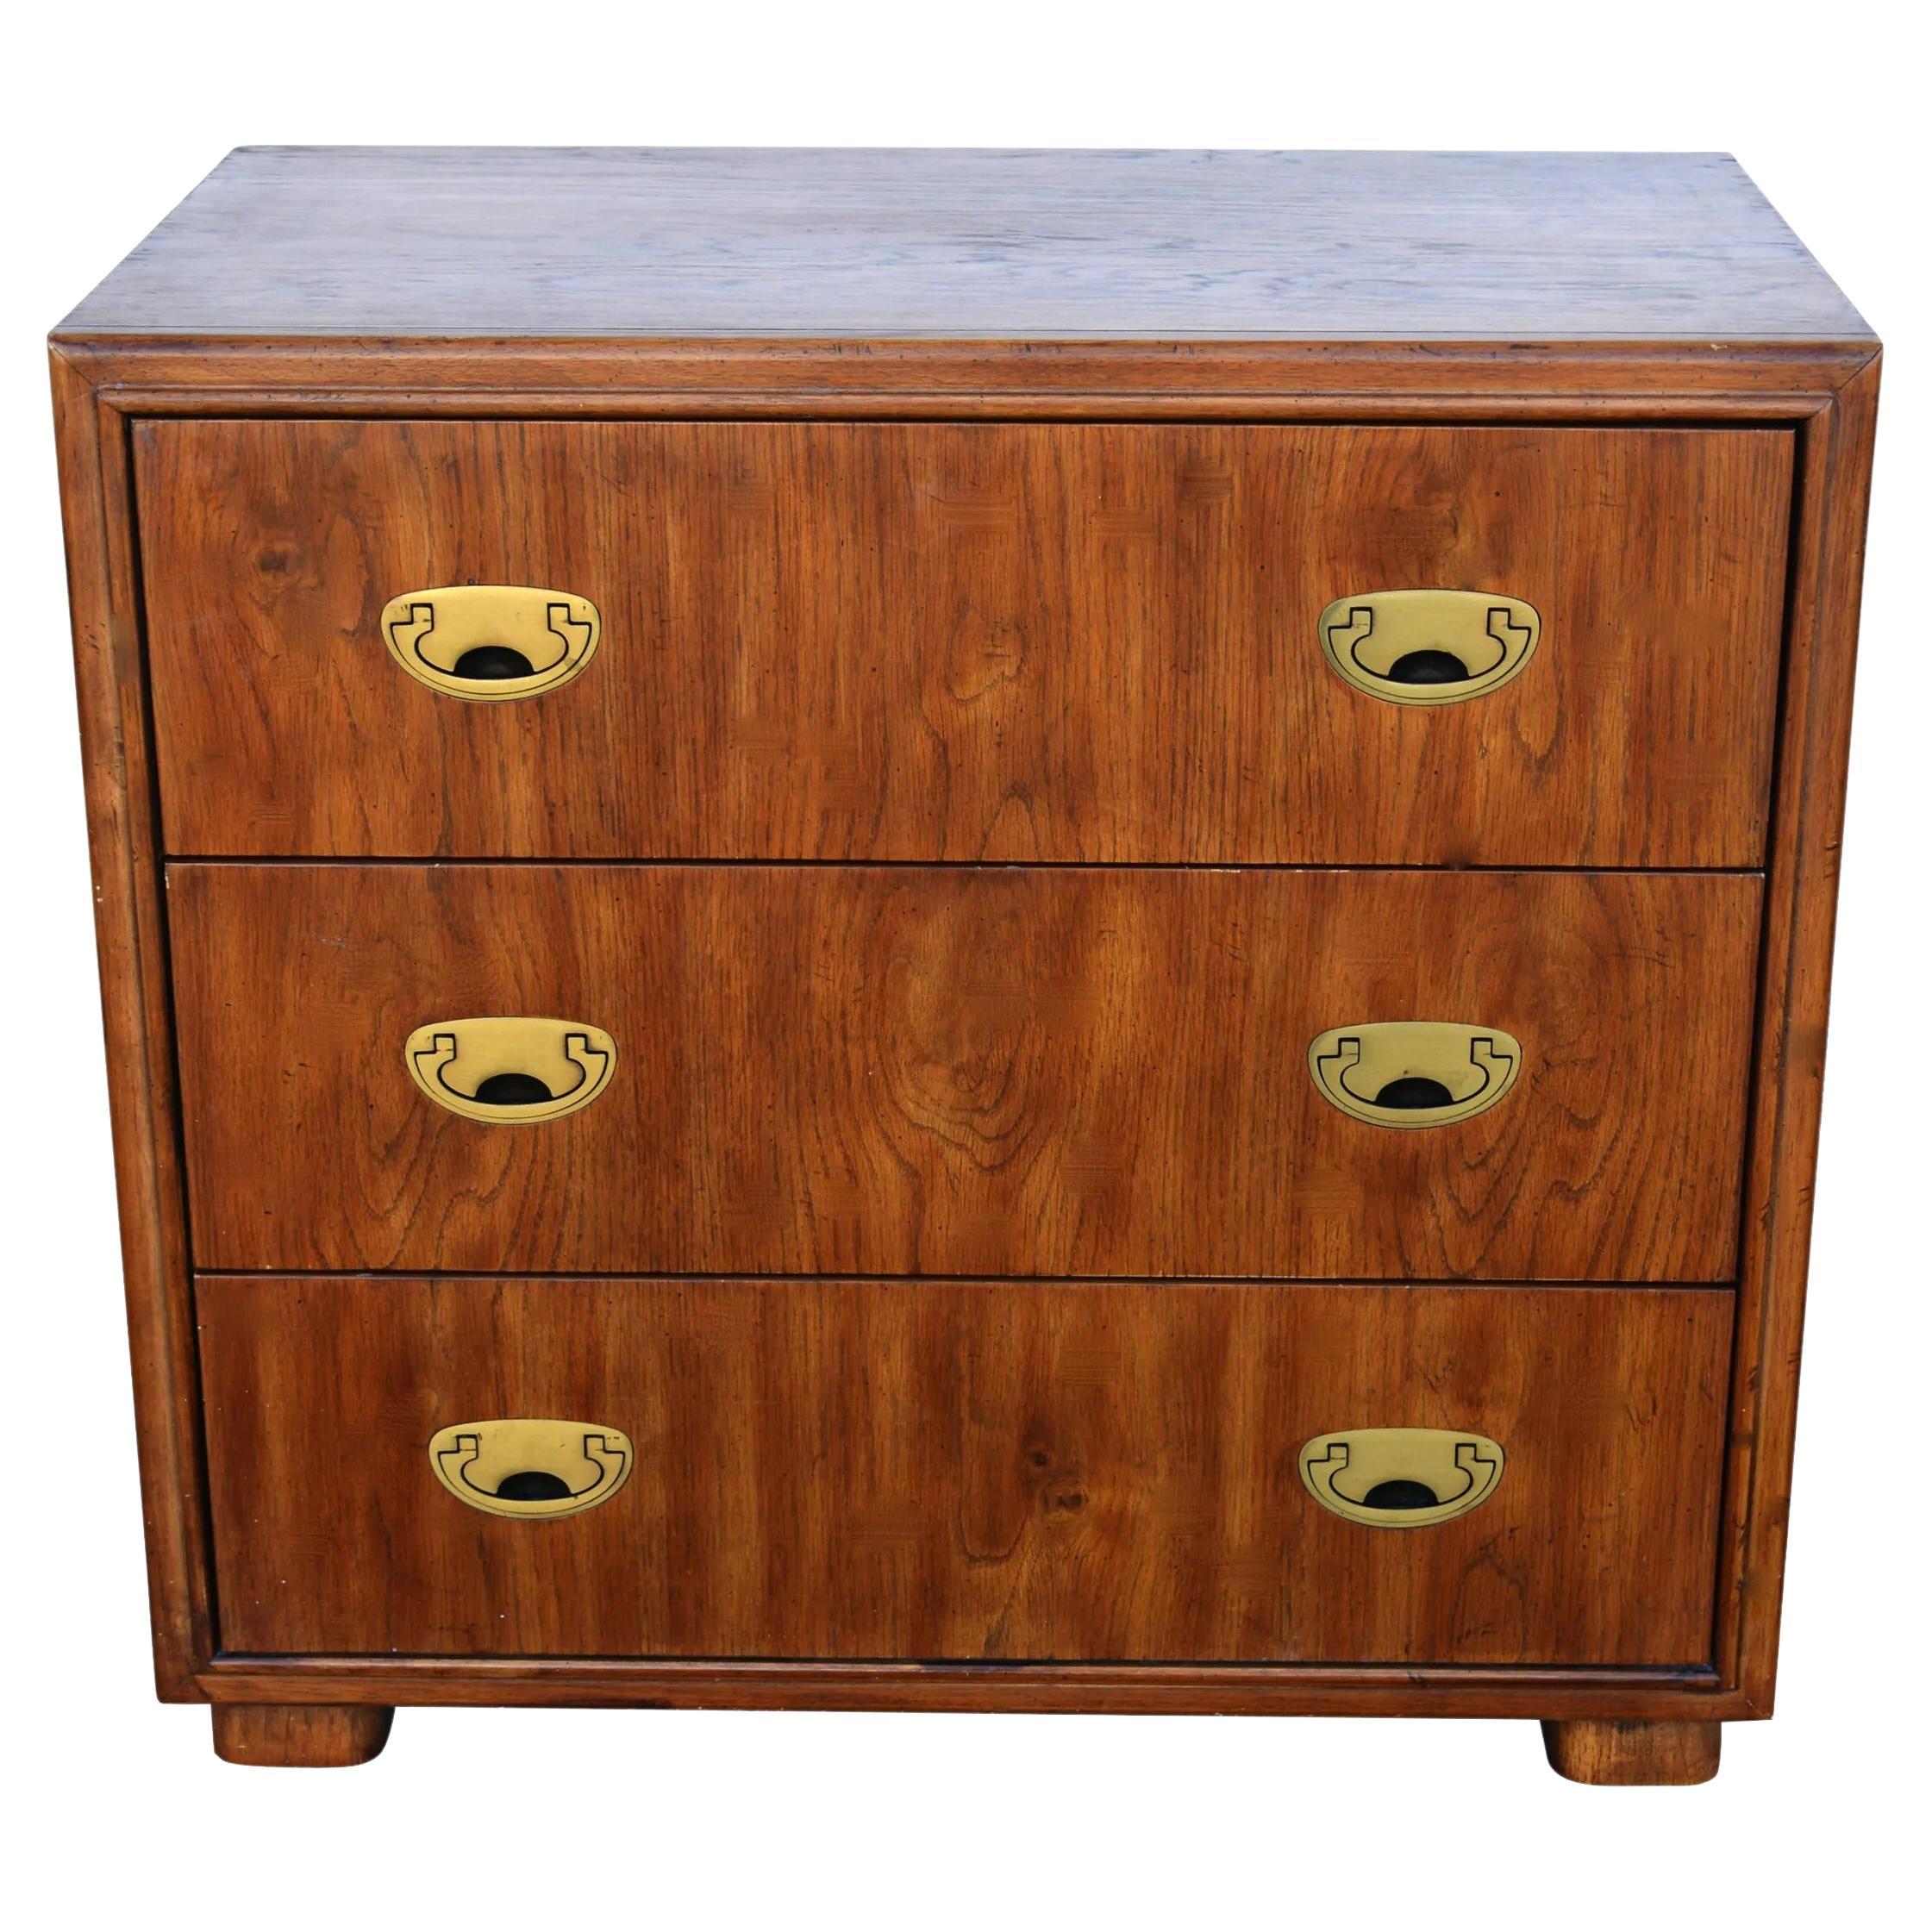 Campaign style Drexel dresser
circa 1970s

Drexel Passage Series dresser in flaxen flared grain. Brass recessed pulls. This dresser provides compact yet efficient 3 drawer storage. Drawers roll out effortlessly on metal glides. Measure: 32”.